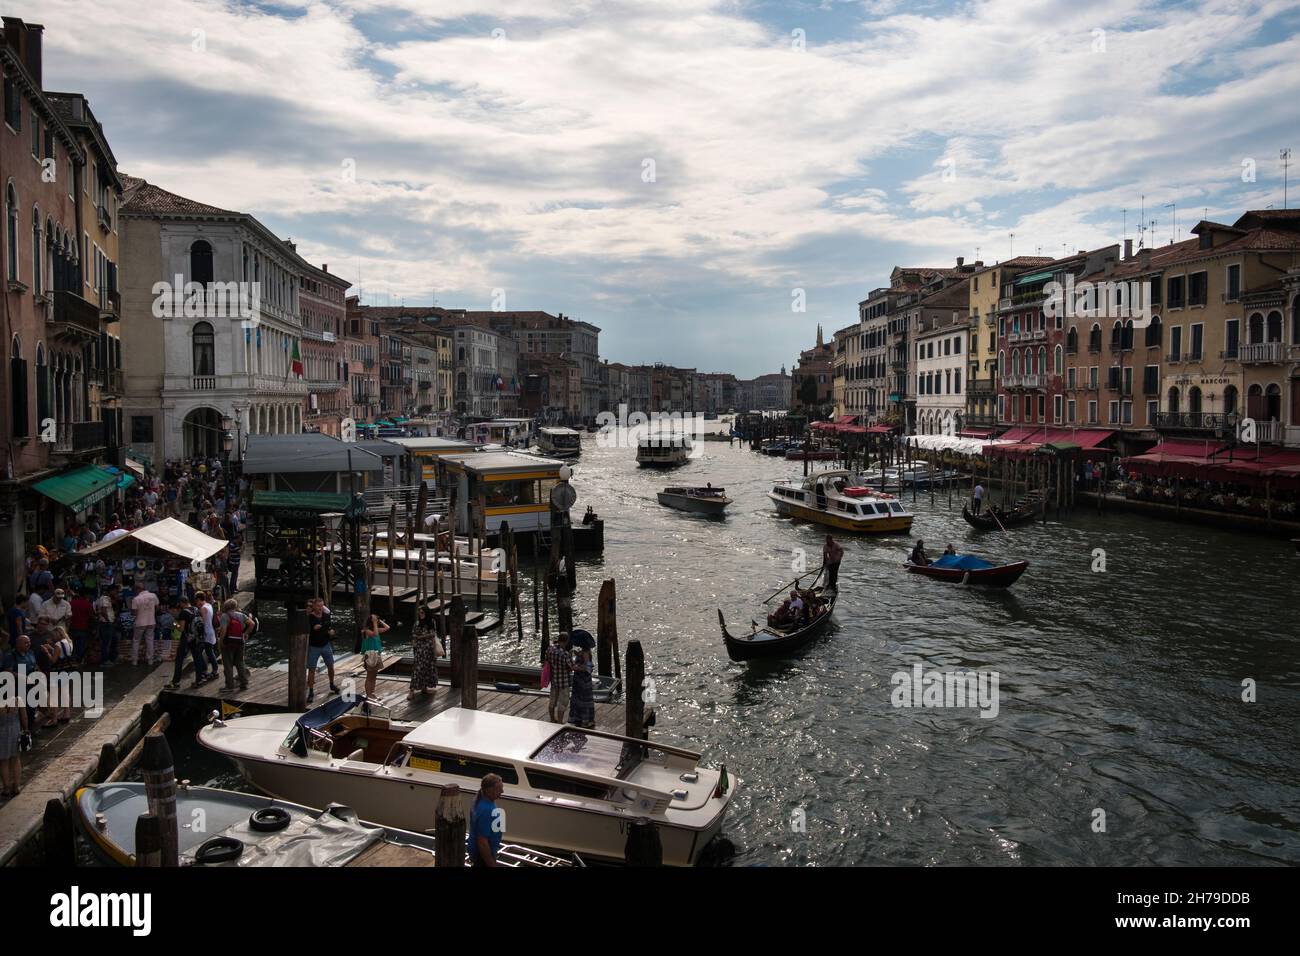 Water taxis, gondolas and other boats along the Grand Canal viewed from the Ponte di Rialto, Venice, Italy. Stock Photo